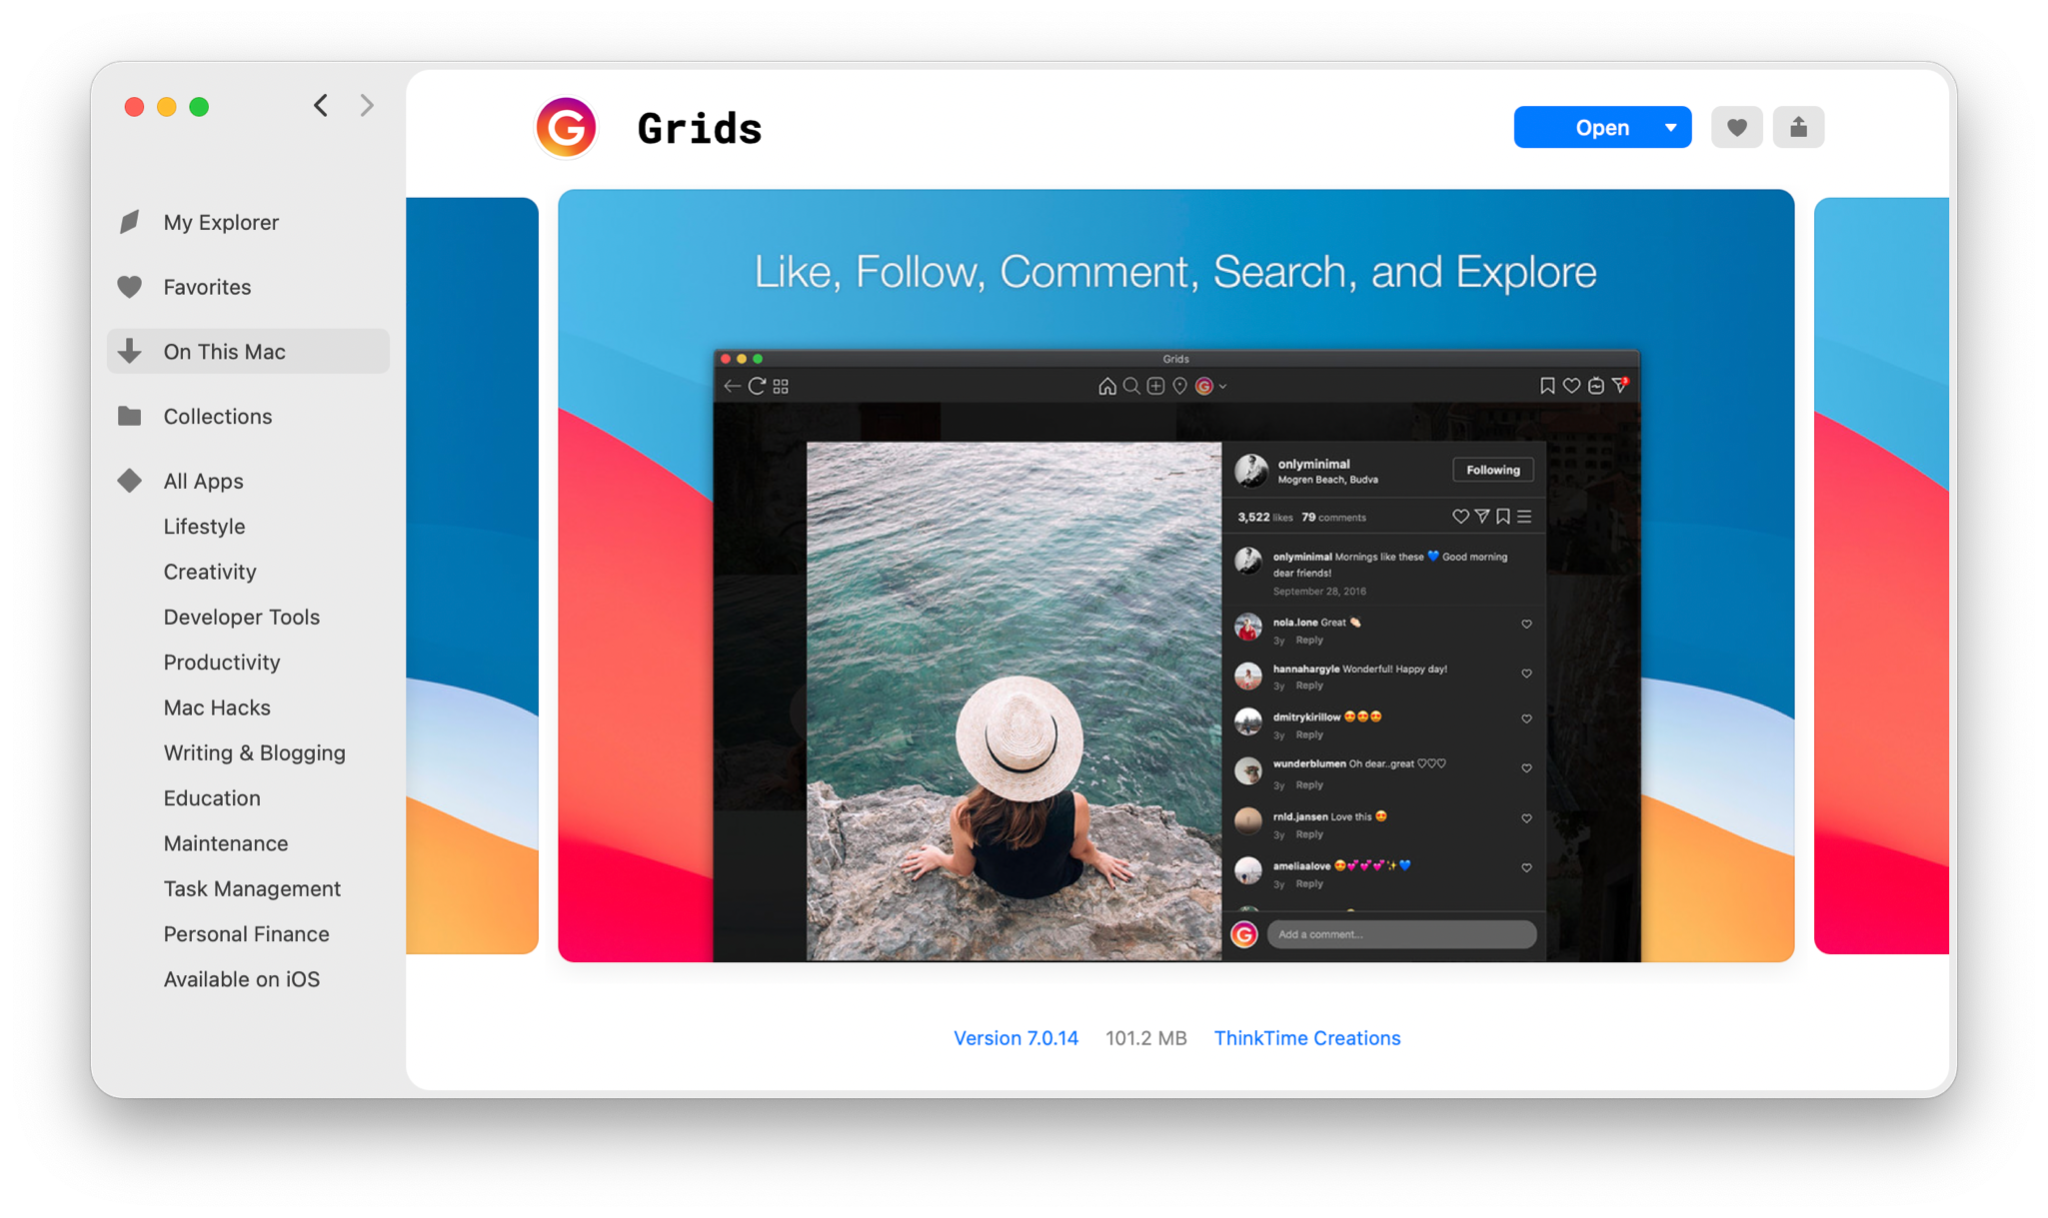 Grids to post to Instagram images and videos